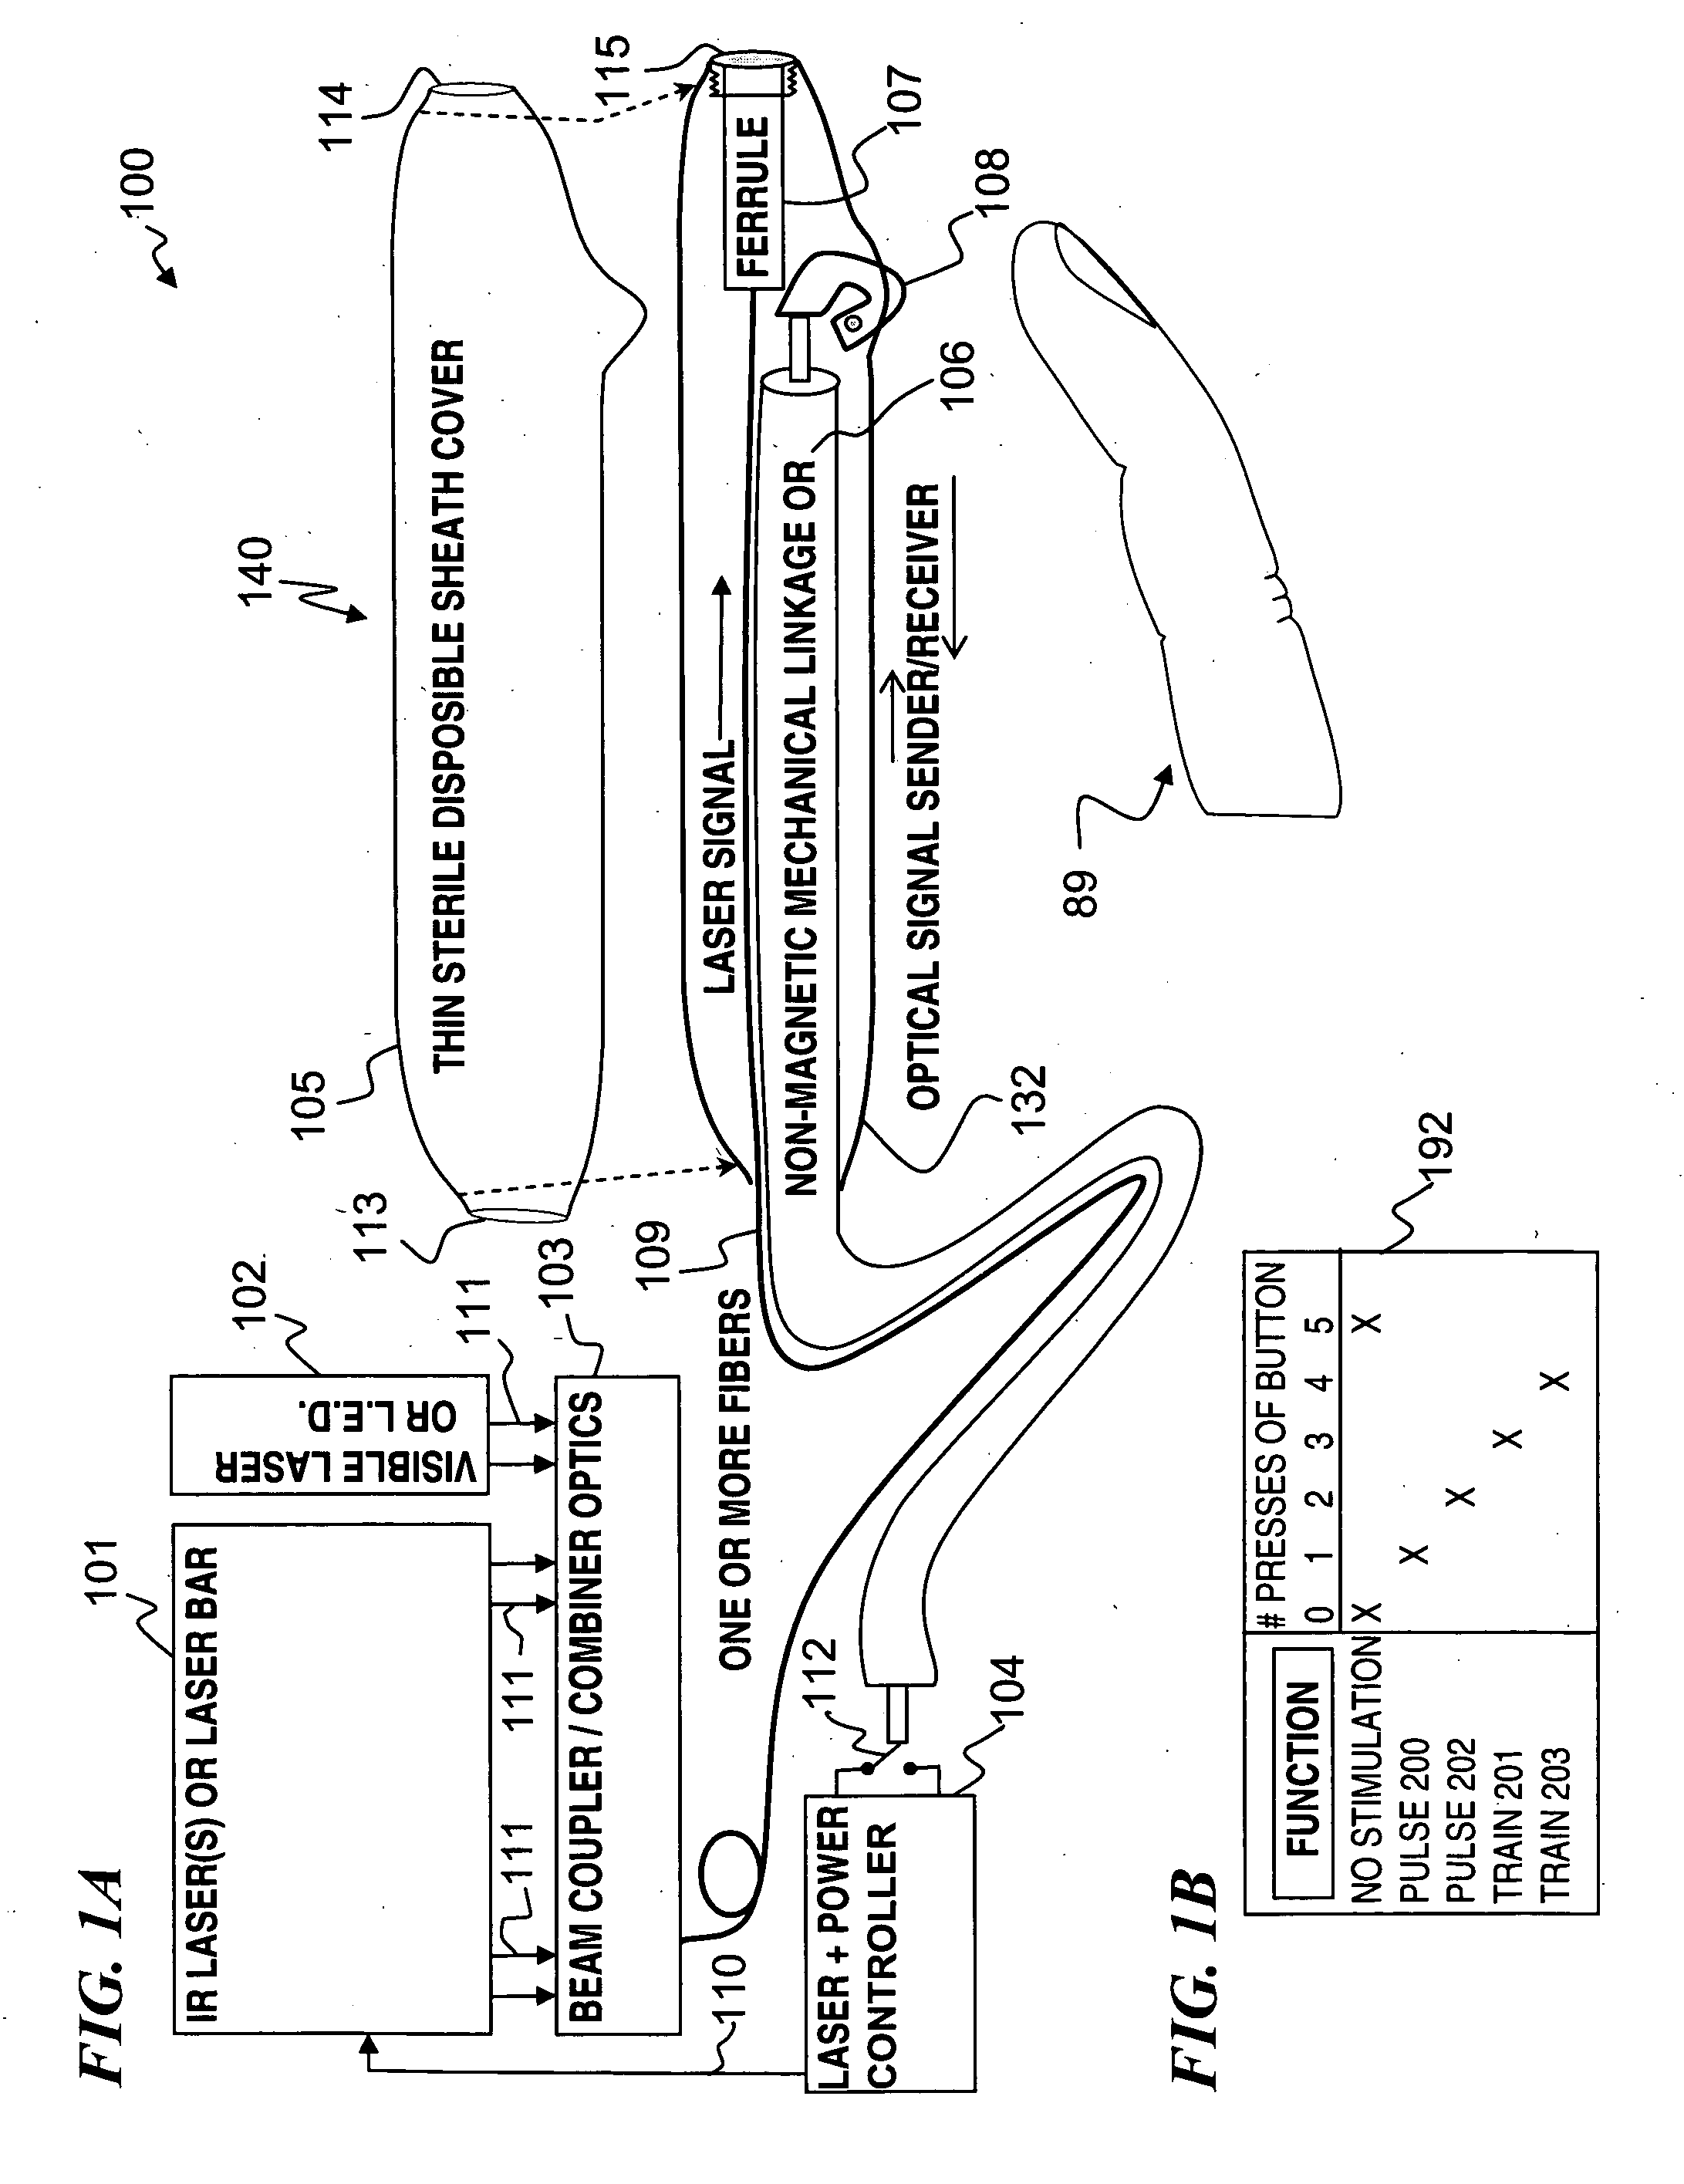 Apparatus and method for optical stimulation of nerves and other animal tissue